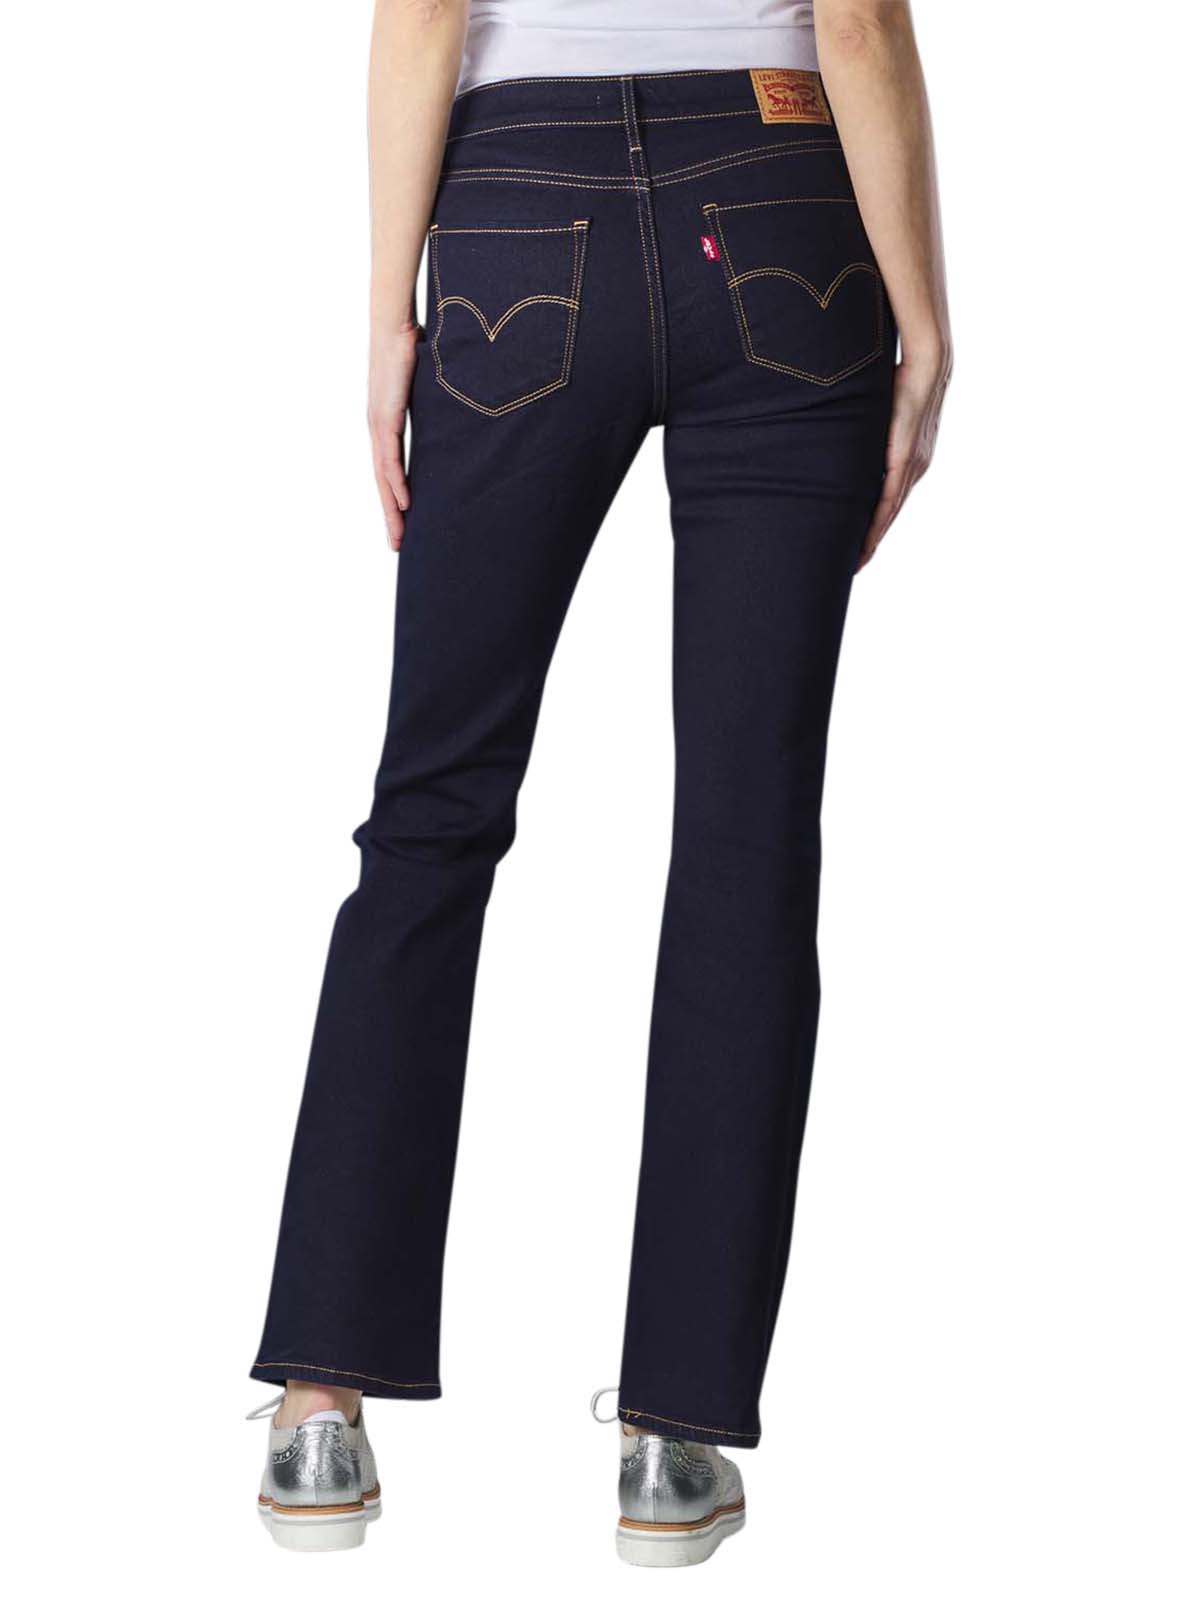 Levi's 725 Jeans Bootcut Fit cast shadow Levi's Women's Jeans | Free  Shipping on  - SIMPLY LOOK GOOD